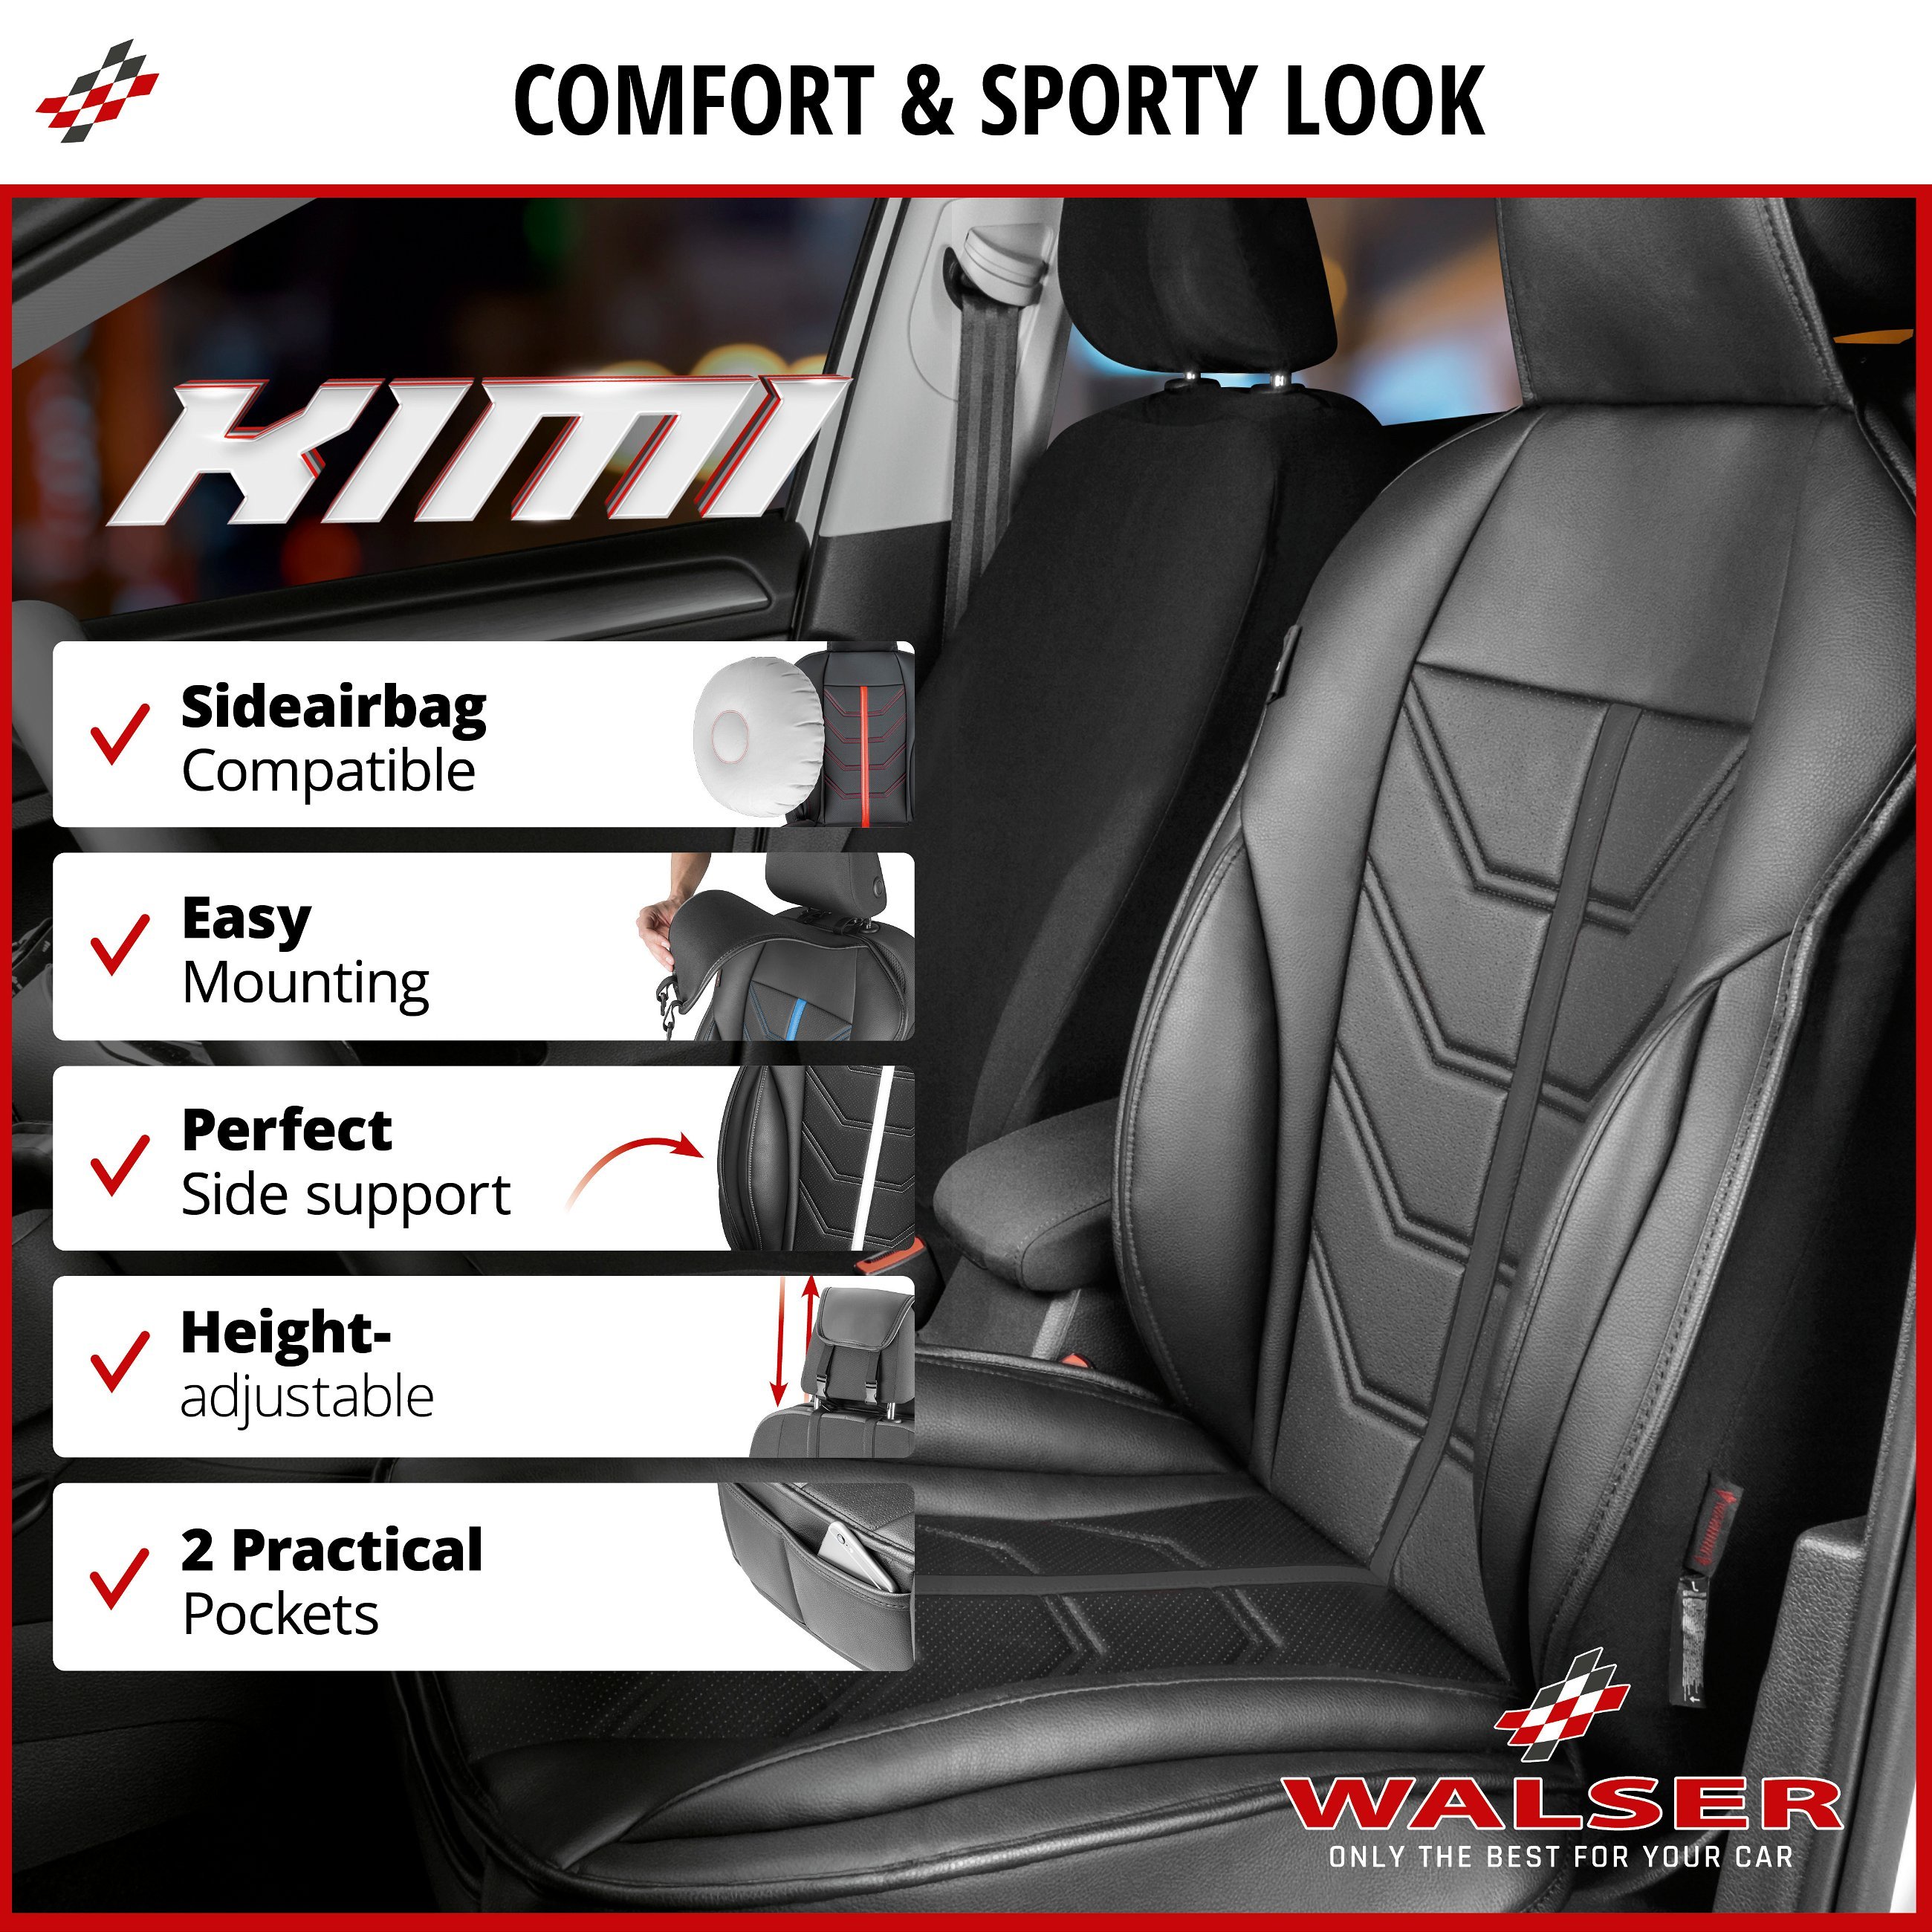 Car Seat cover Kimi, seat protector for cars in racing look black